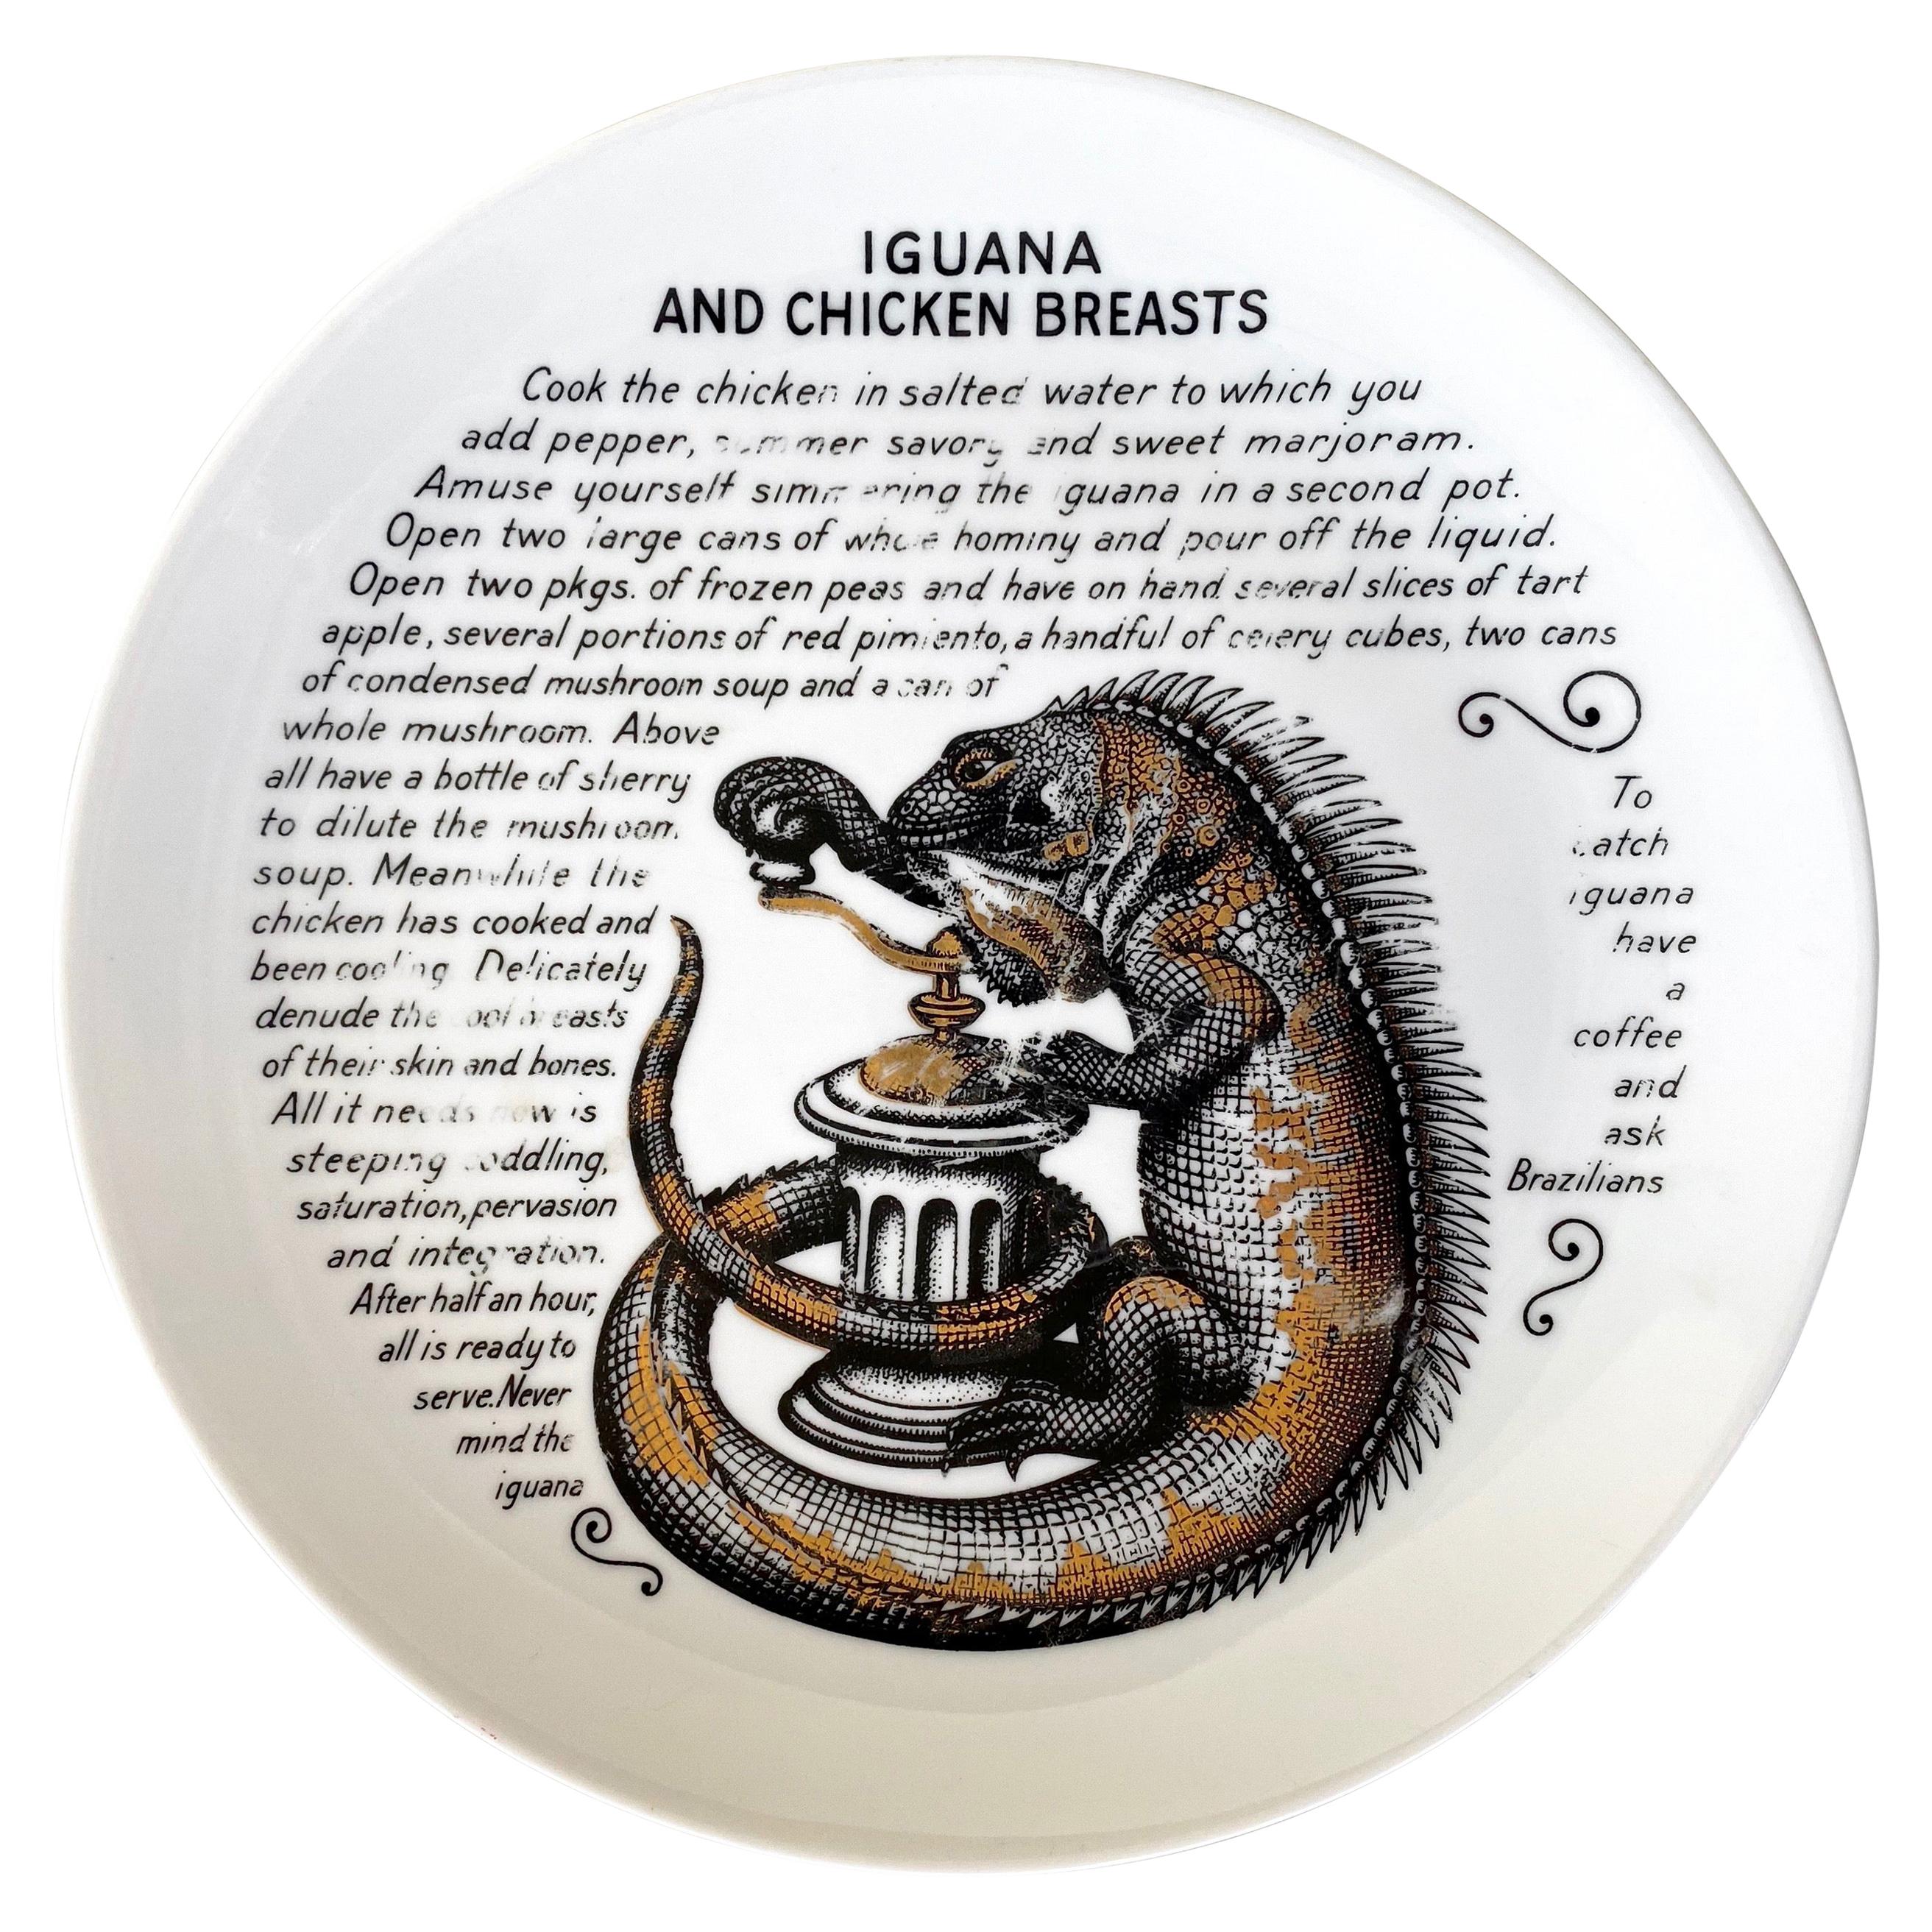 Fornasetti for Fleming Joffe “Iguana and Chicken Breasts” Recipe Plate, 1960s For Sale